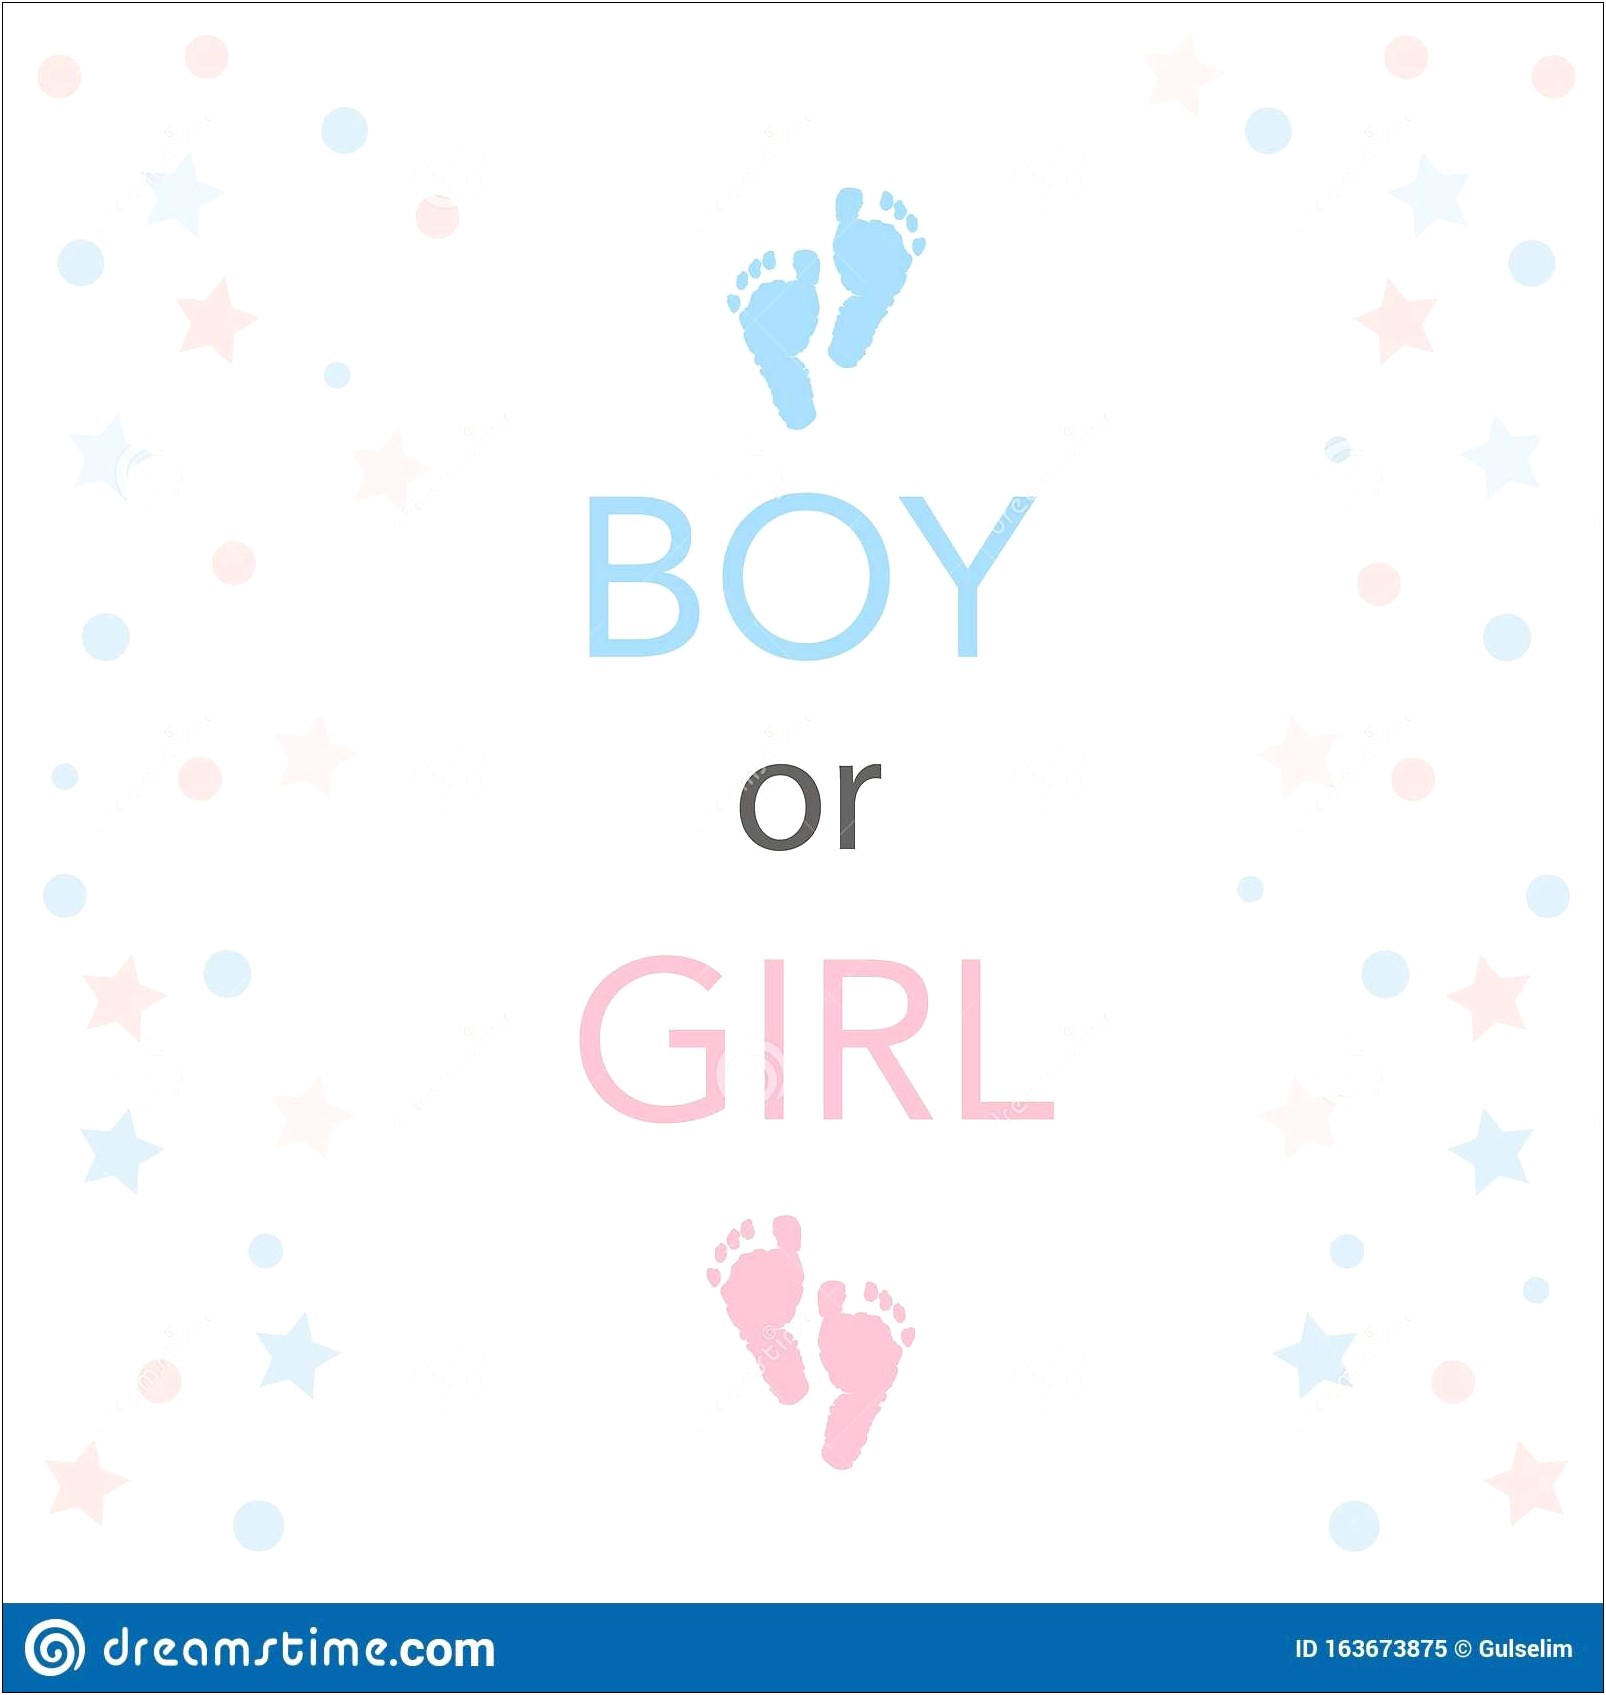 Gender Reveal Invitation Template Free Download